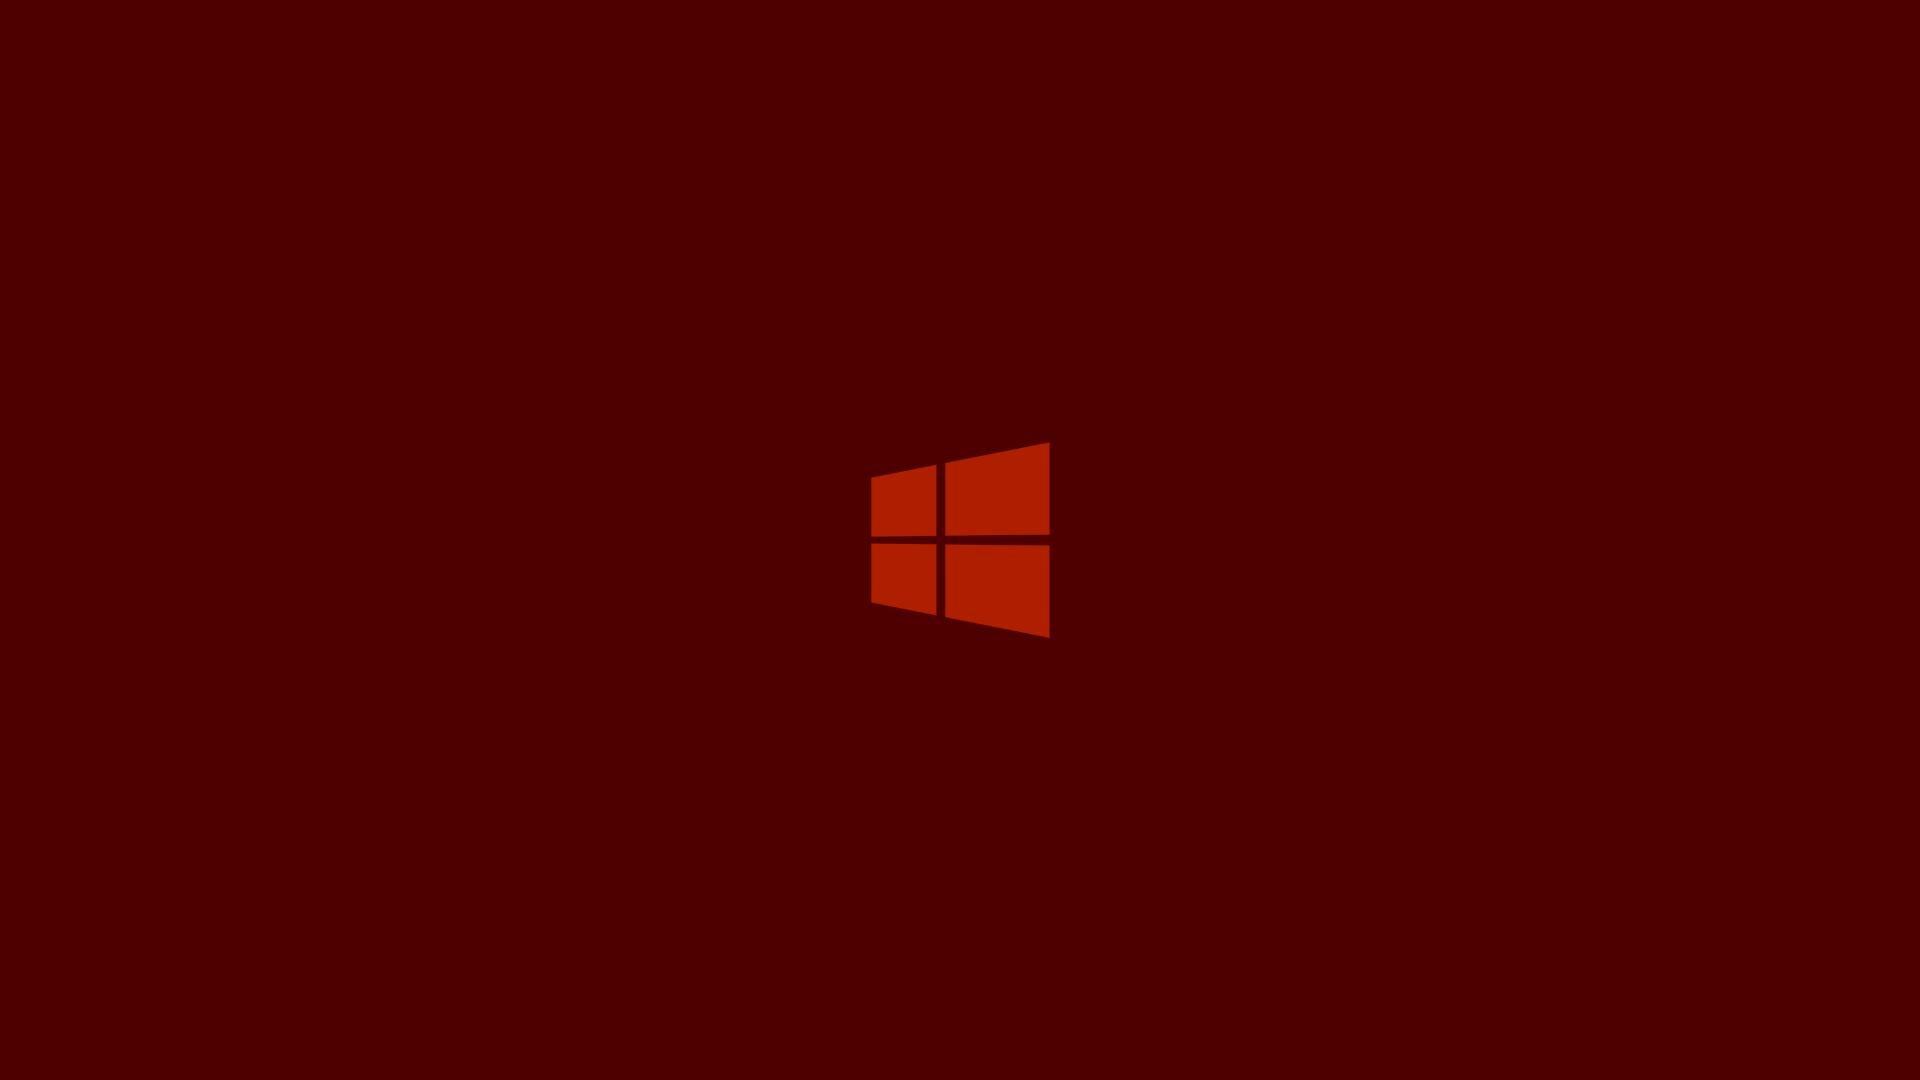 The Wallpaper On My Desktop Windows 10 Started Turning Red